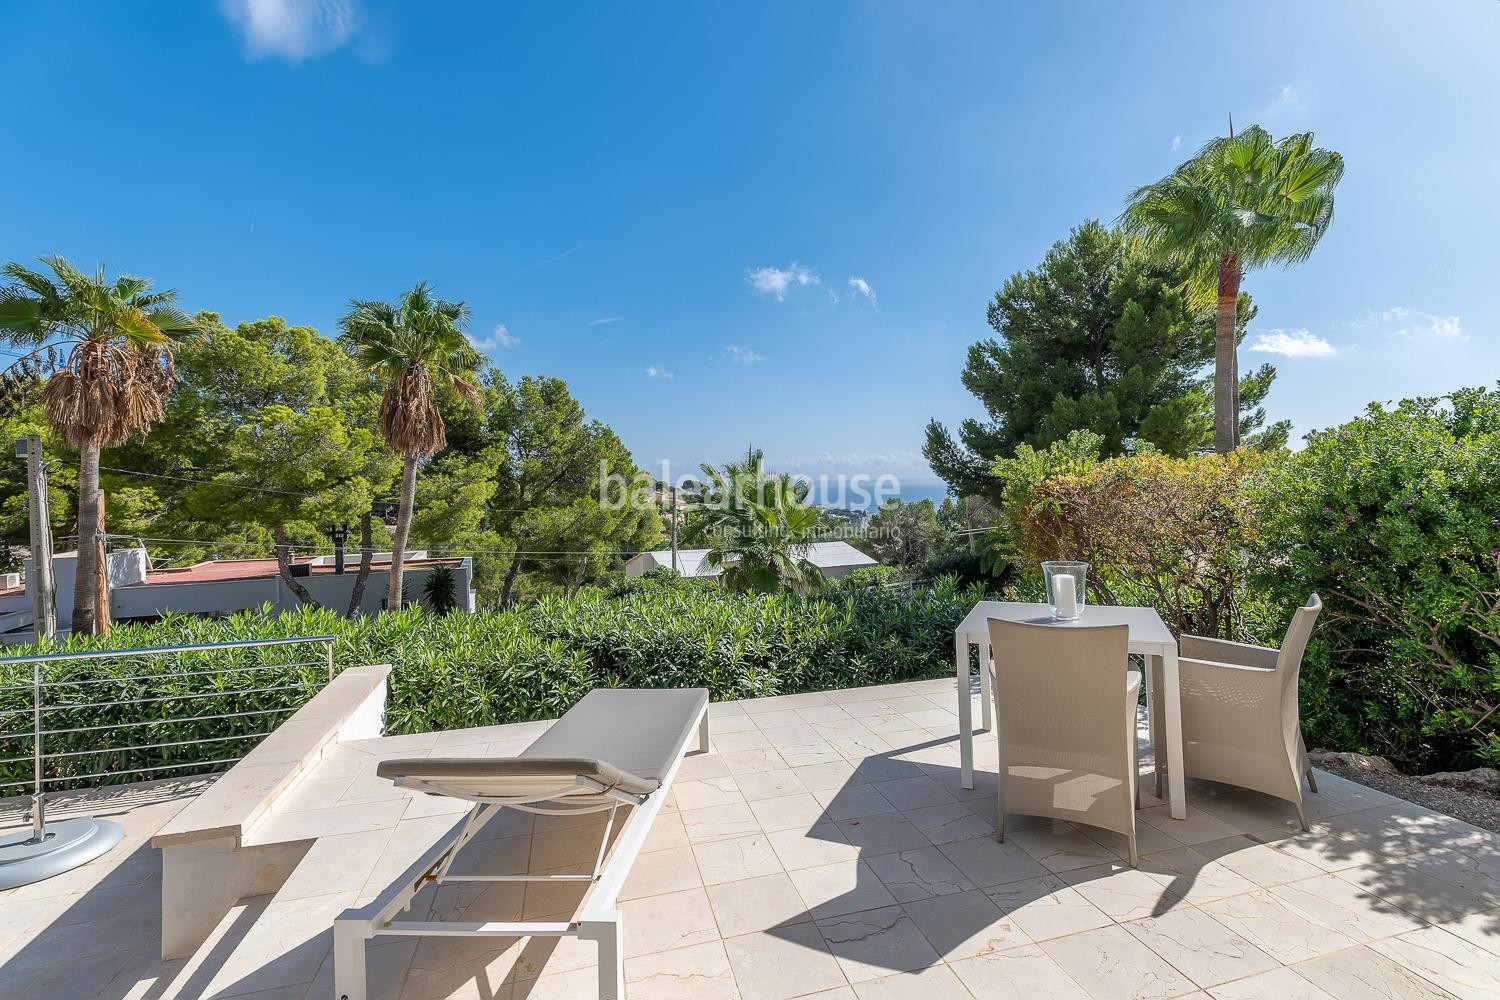 Mediterranean style villa with beautiful sea views and sunsets in Costa den Blanes